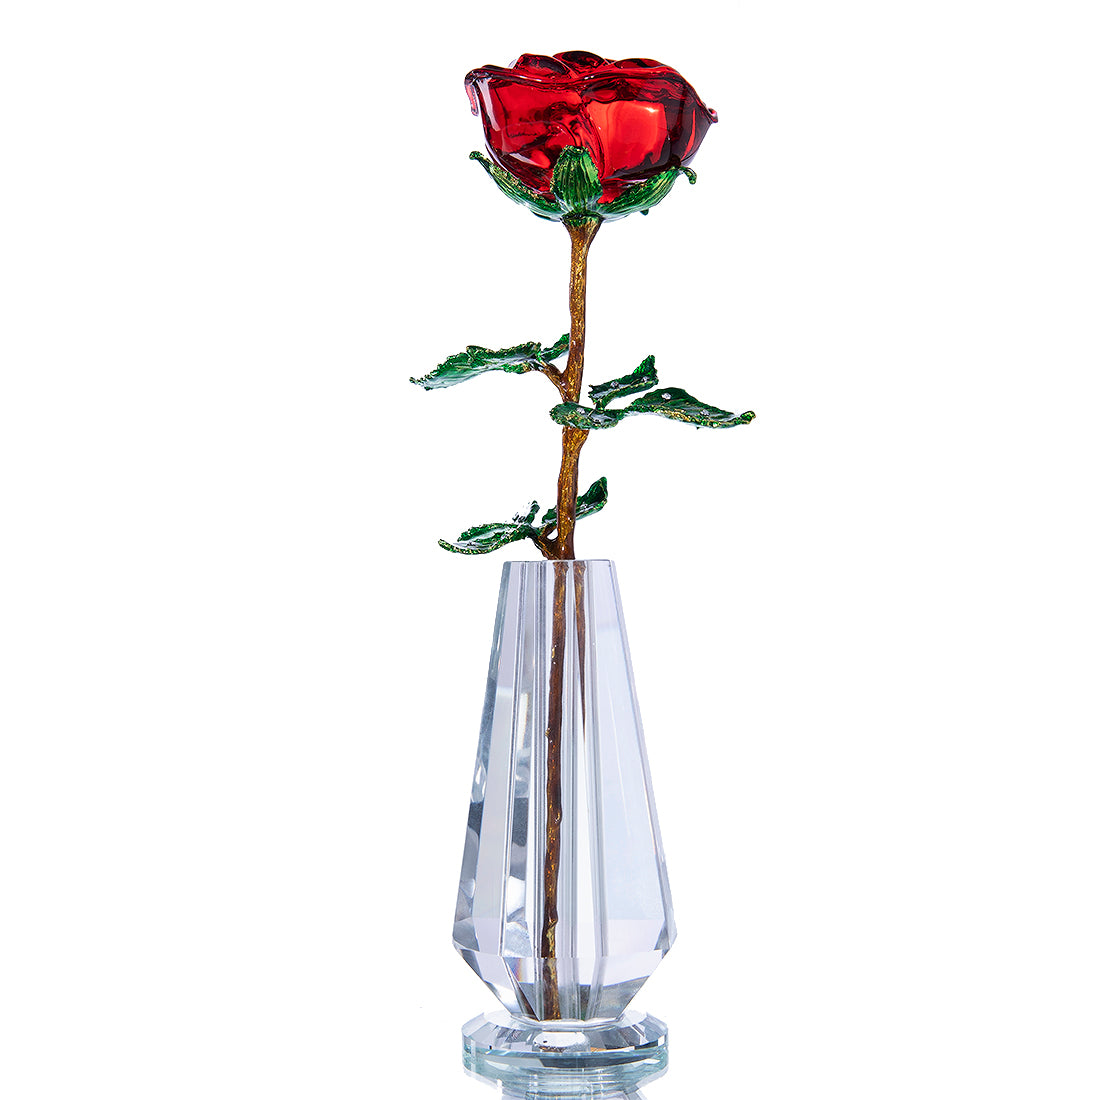 HDCRYSTALGIFTS Crystal Rose Flower Glass Pink and Rose Red Flower with  Green Leaves for Wedding Anniversary/Wife, Romantic Forever Gifts for Her